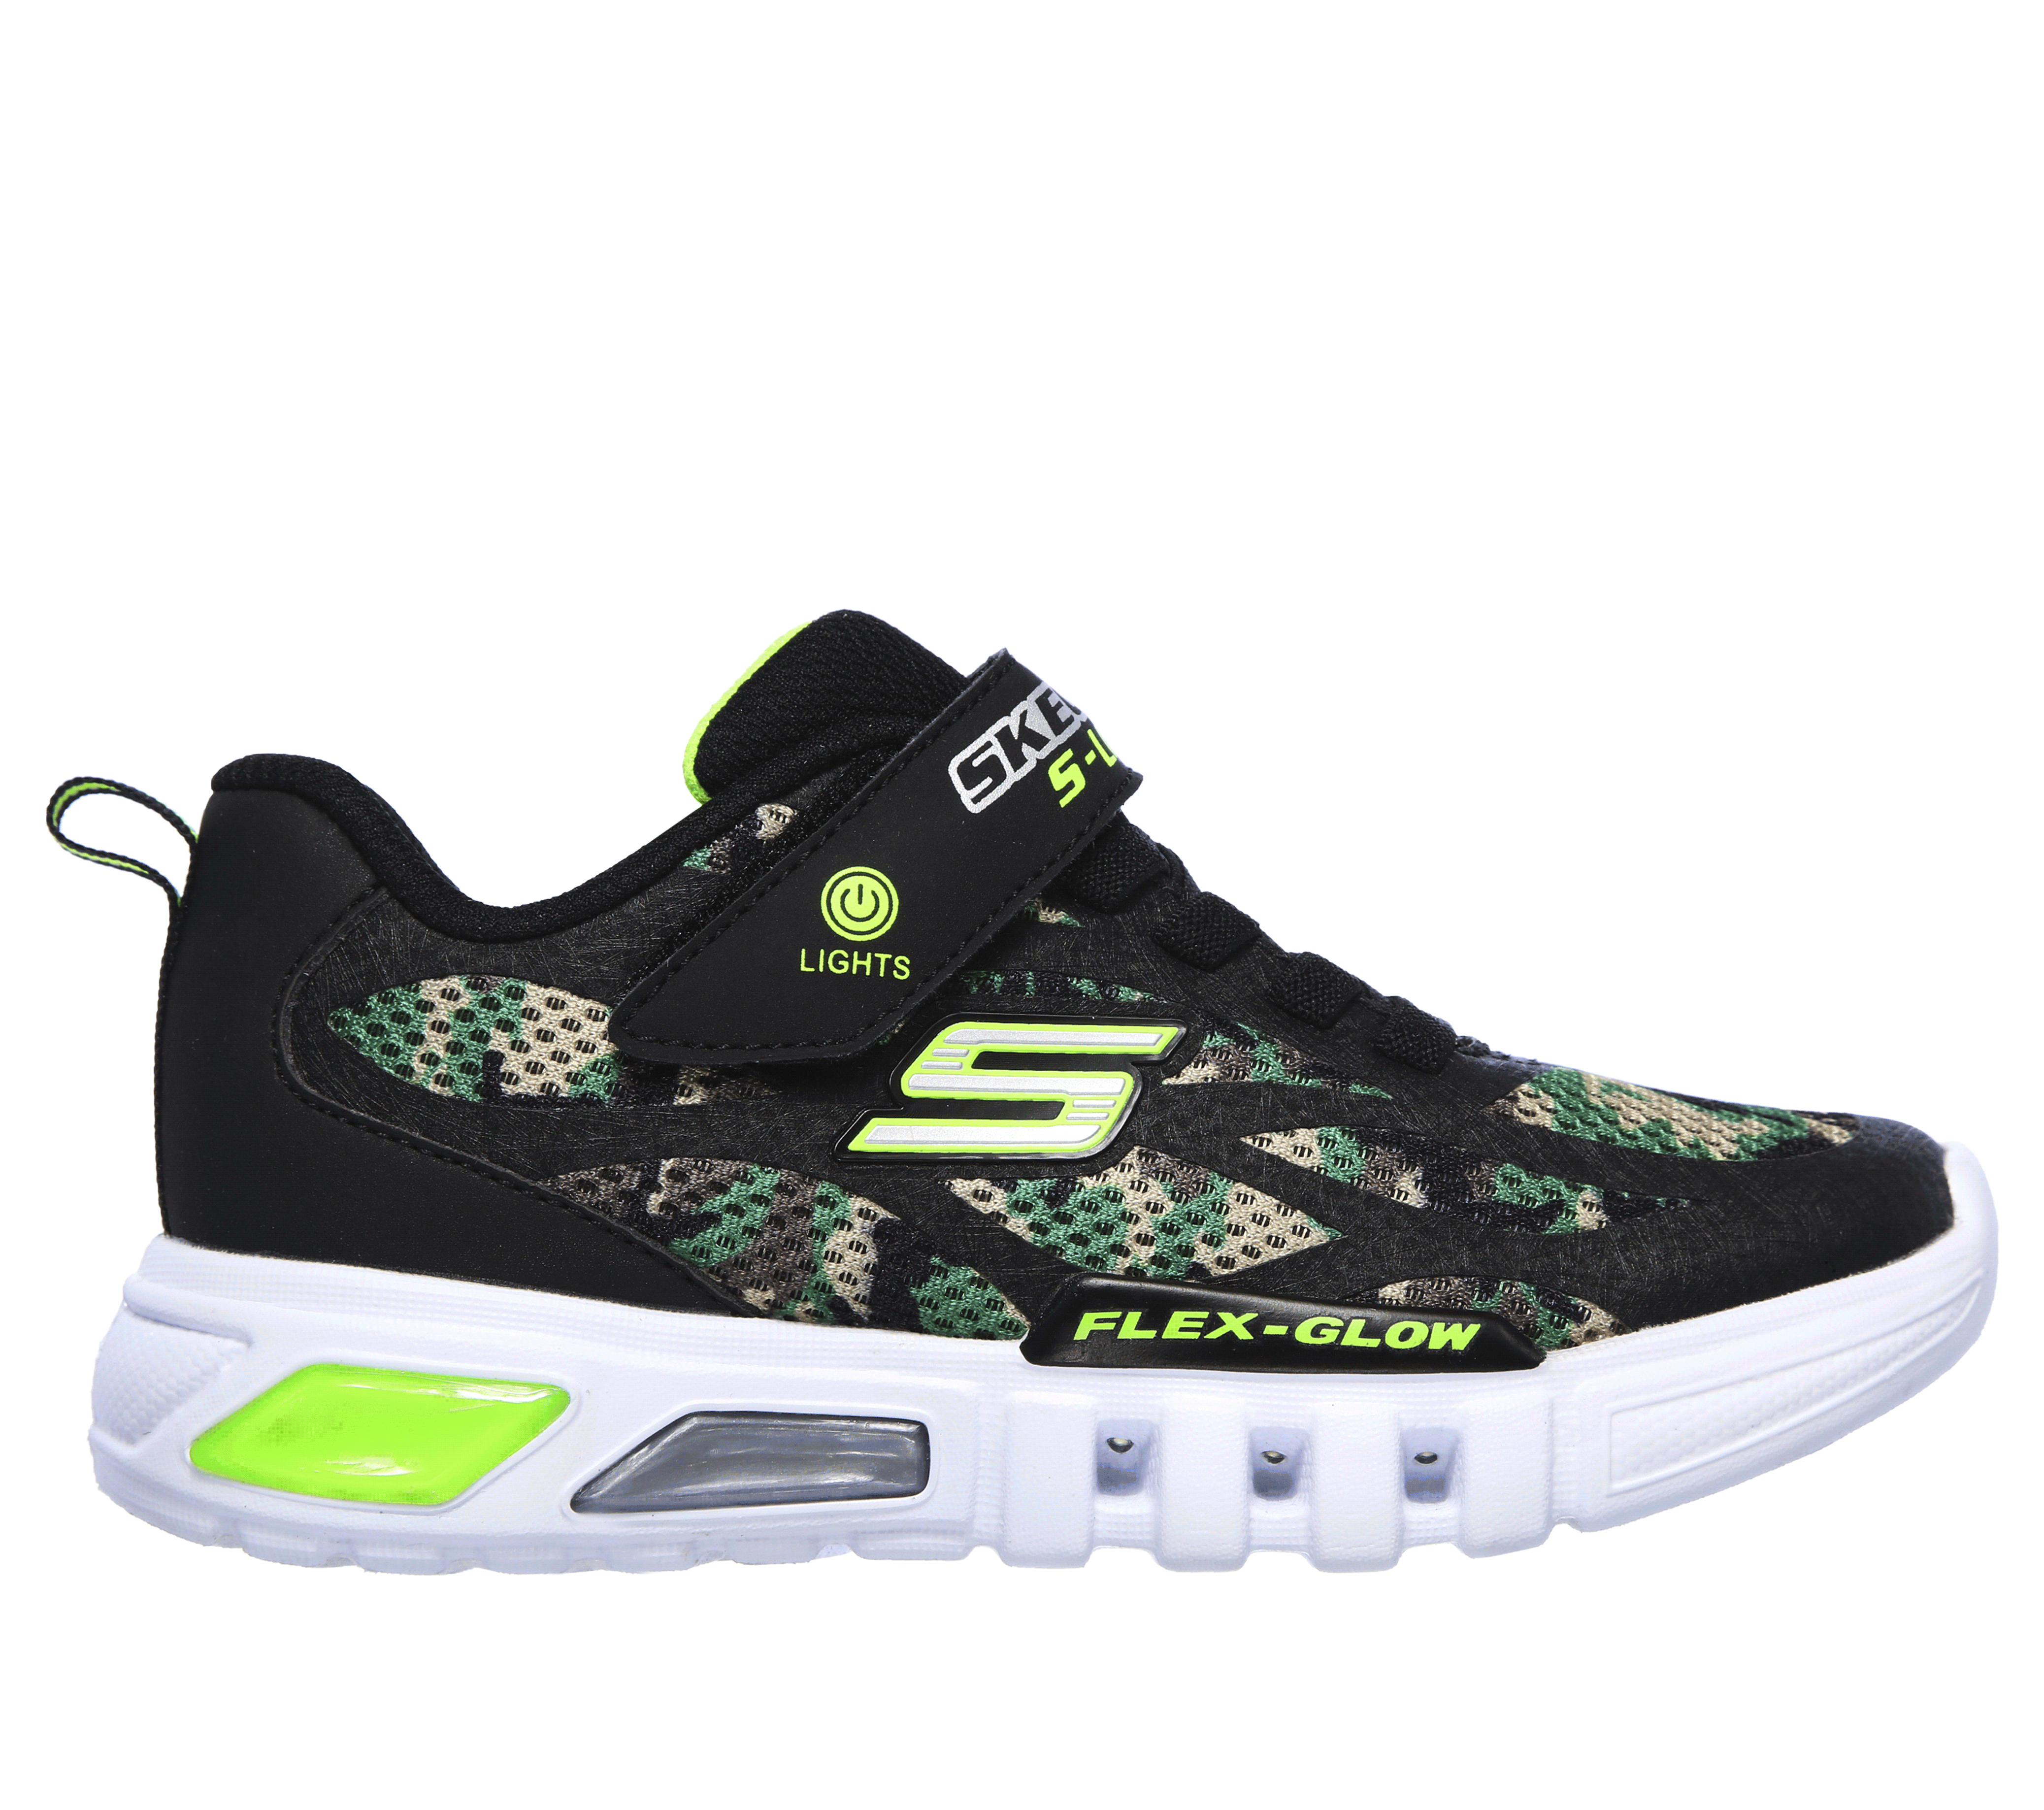 skechers camouflage shoes